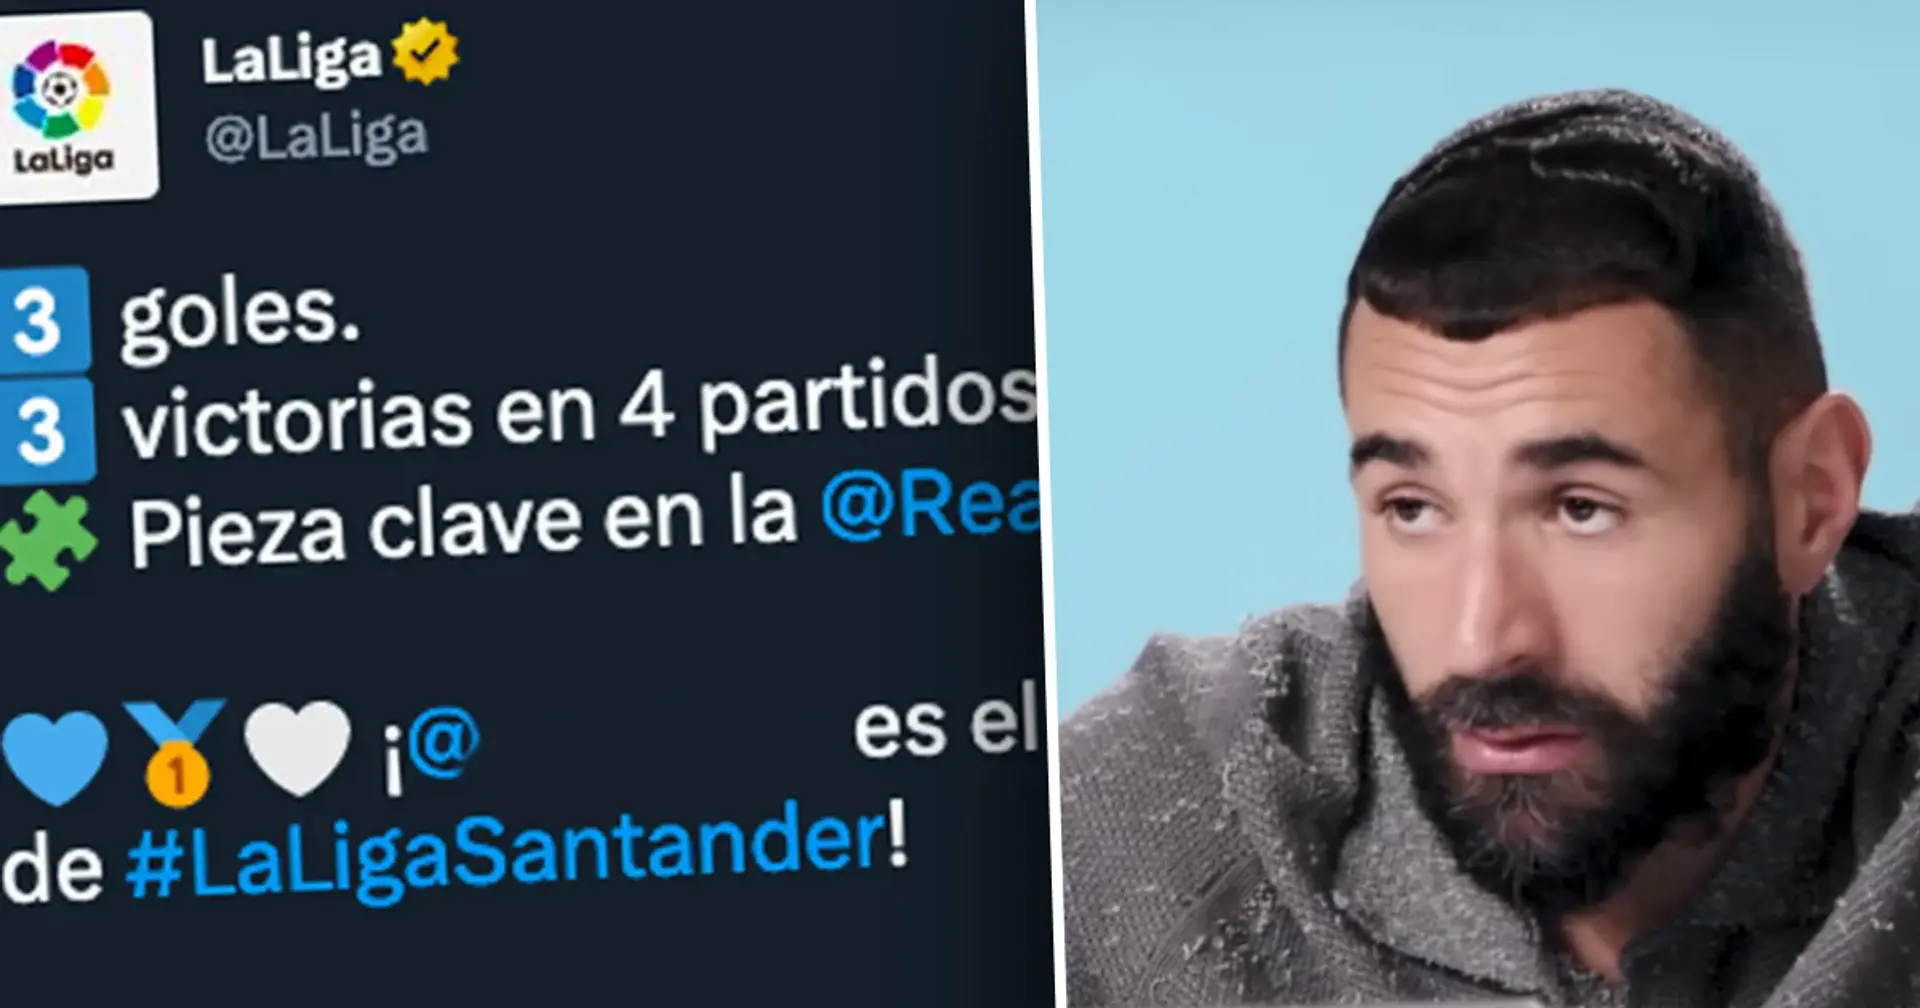 Benzema overlooked as La Liga unveil Player of the Month in January